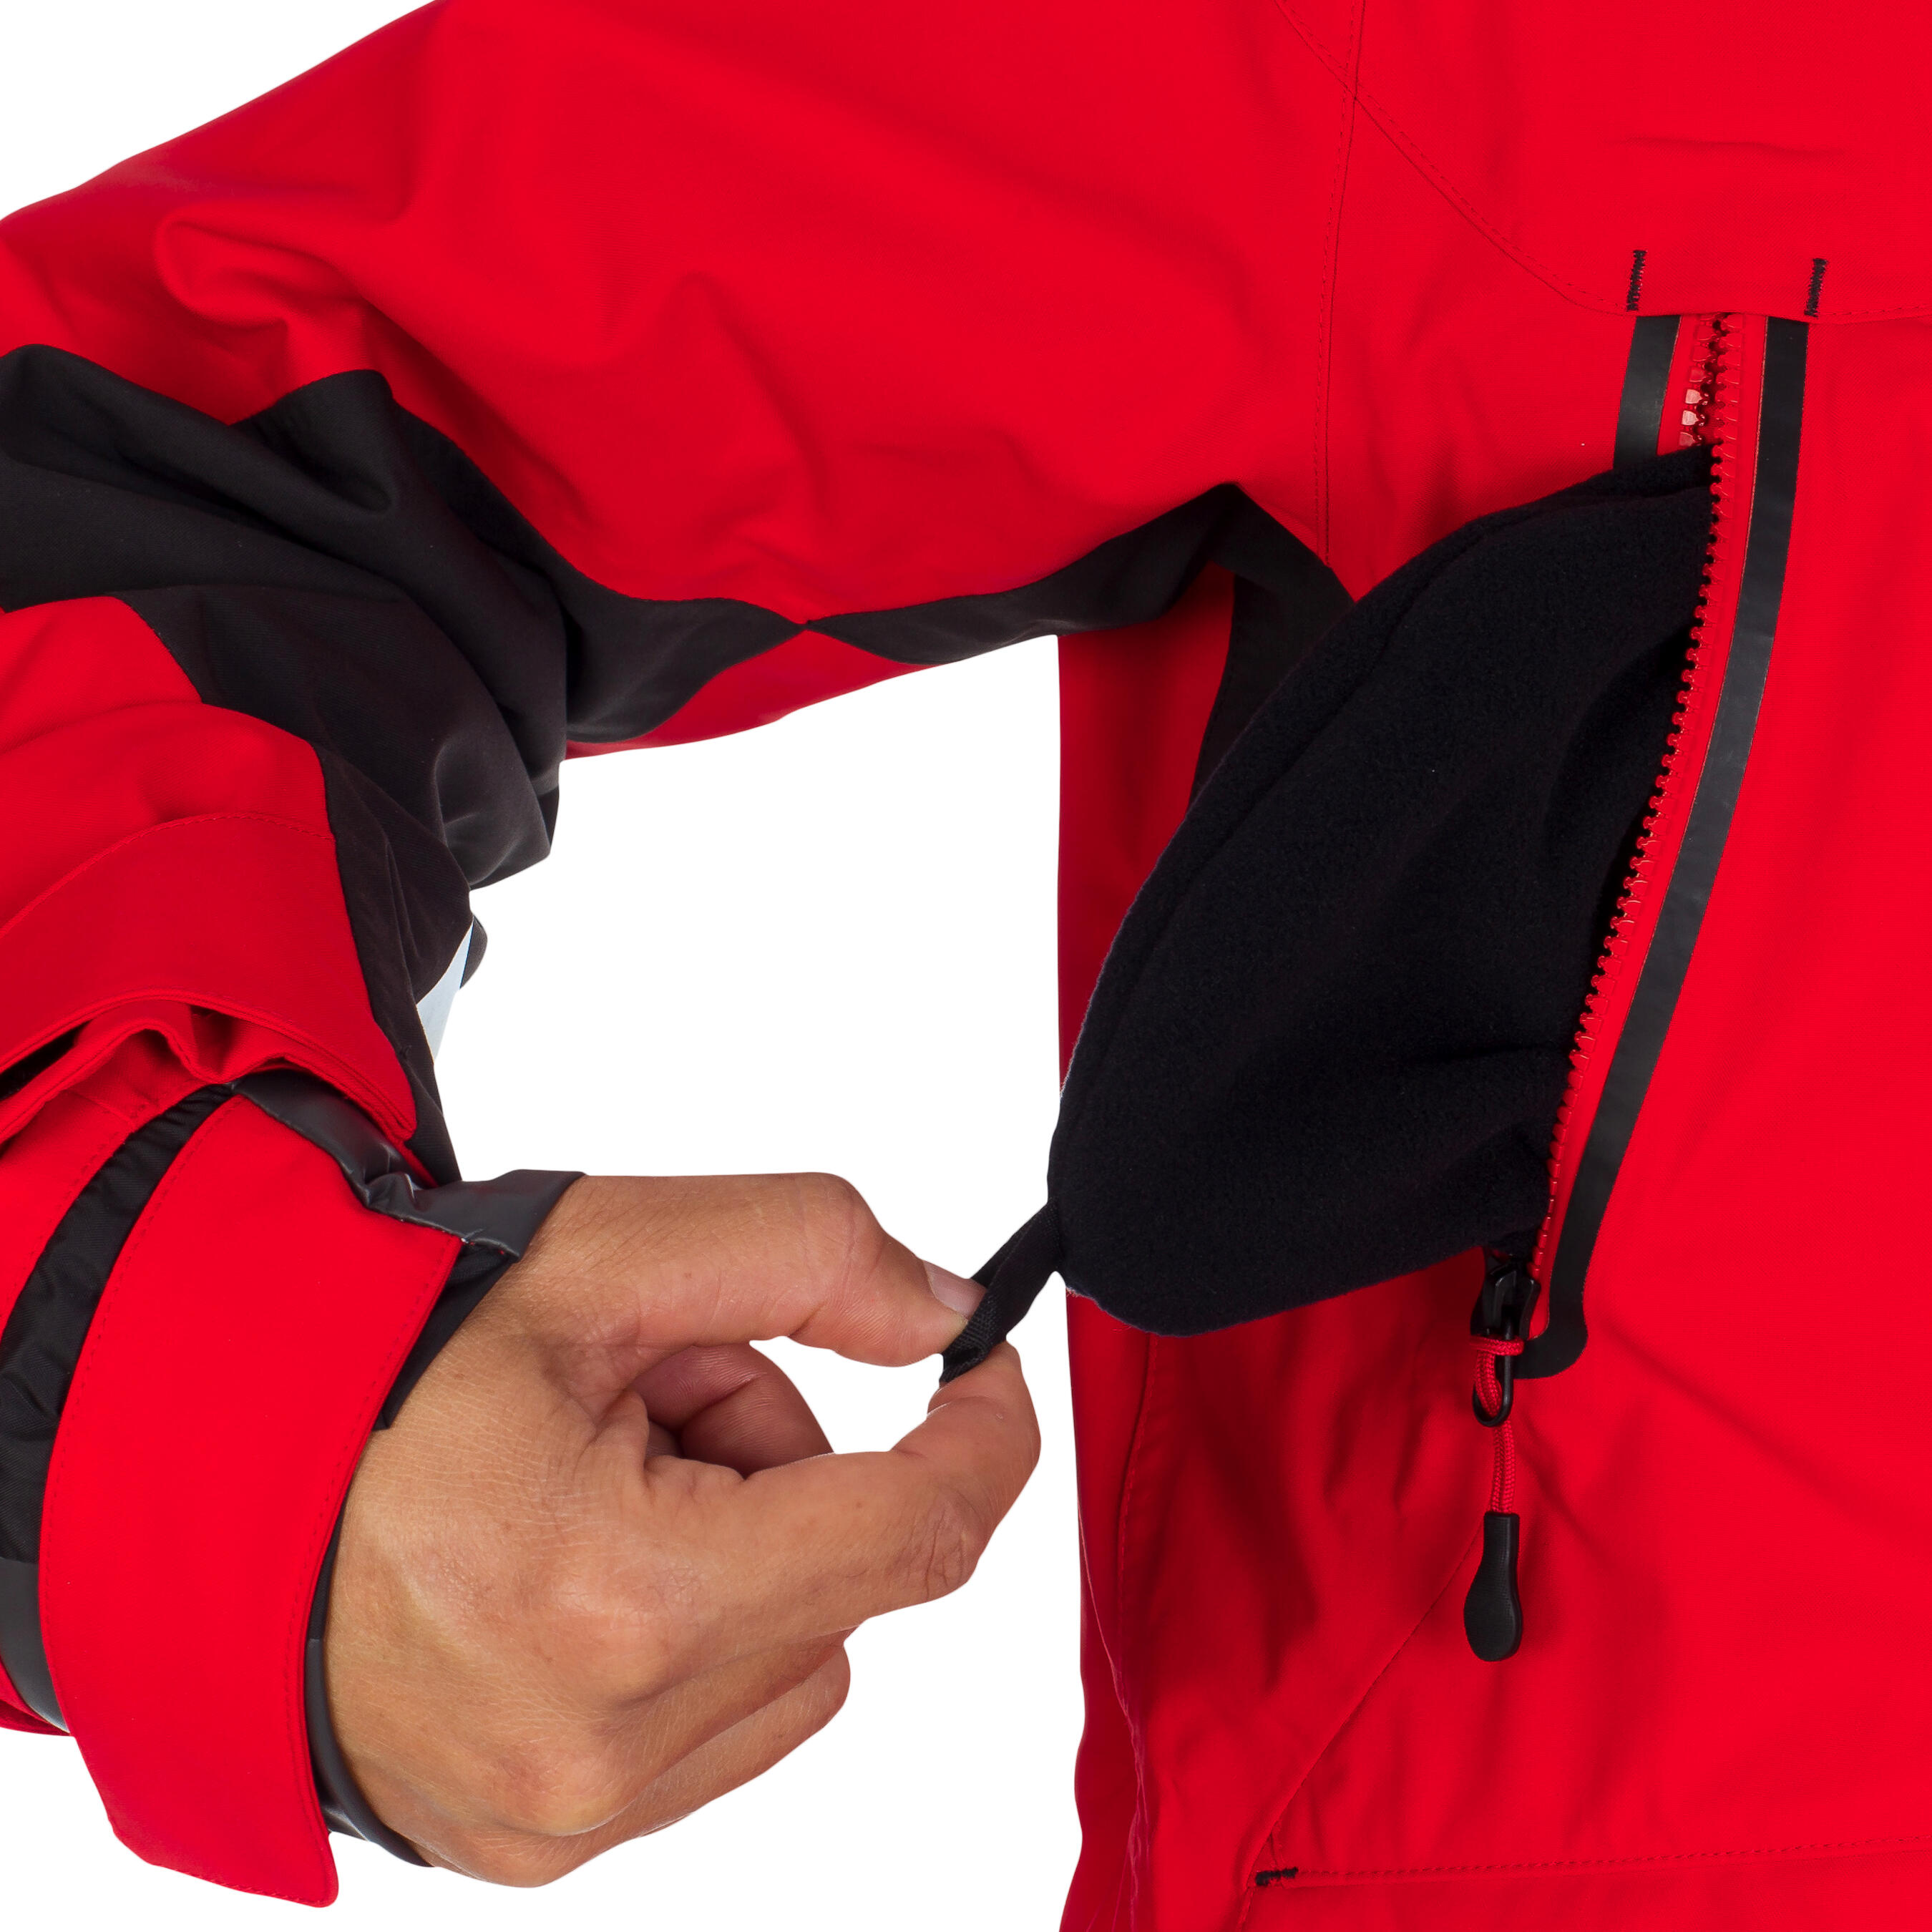 Ozean 900 Men's Waterproof and Breathable Sailing Jacket - Red 39/44